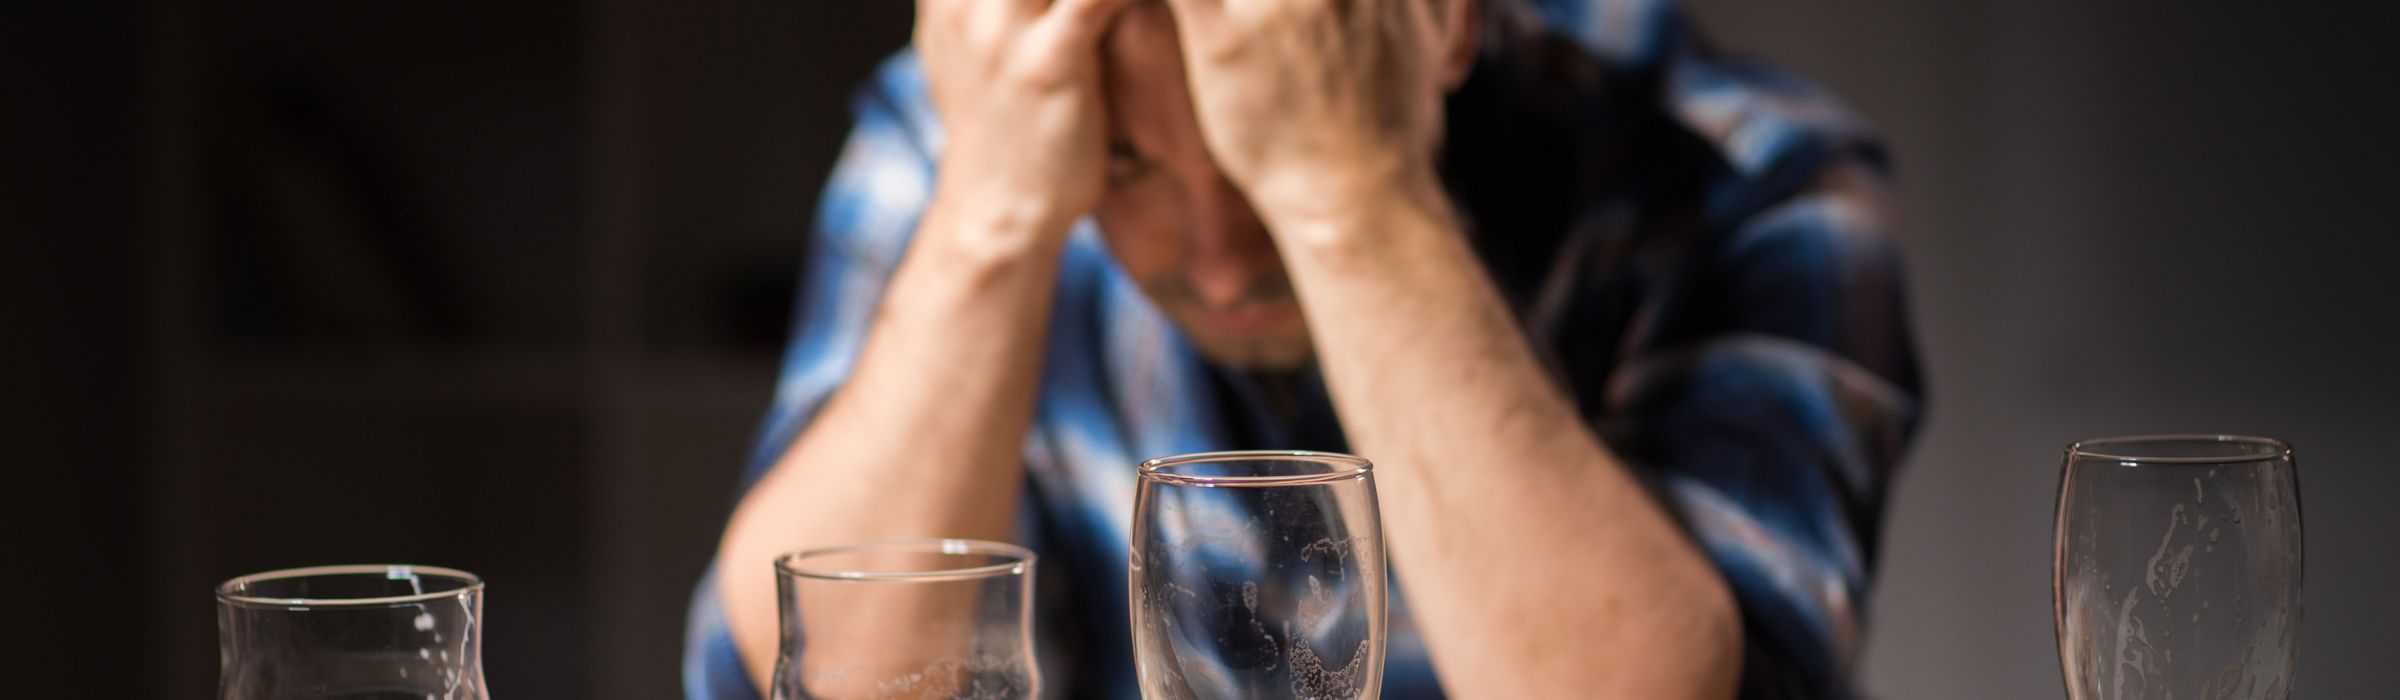 Does Alcohol Cause Inflammation? Yes, But It's Reversible